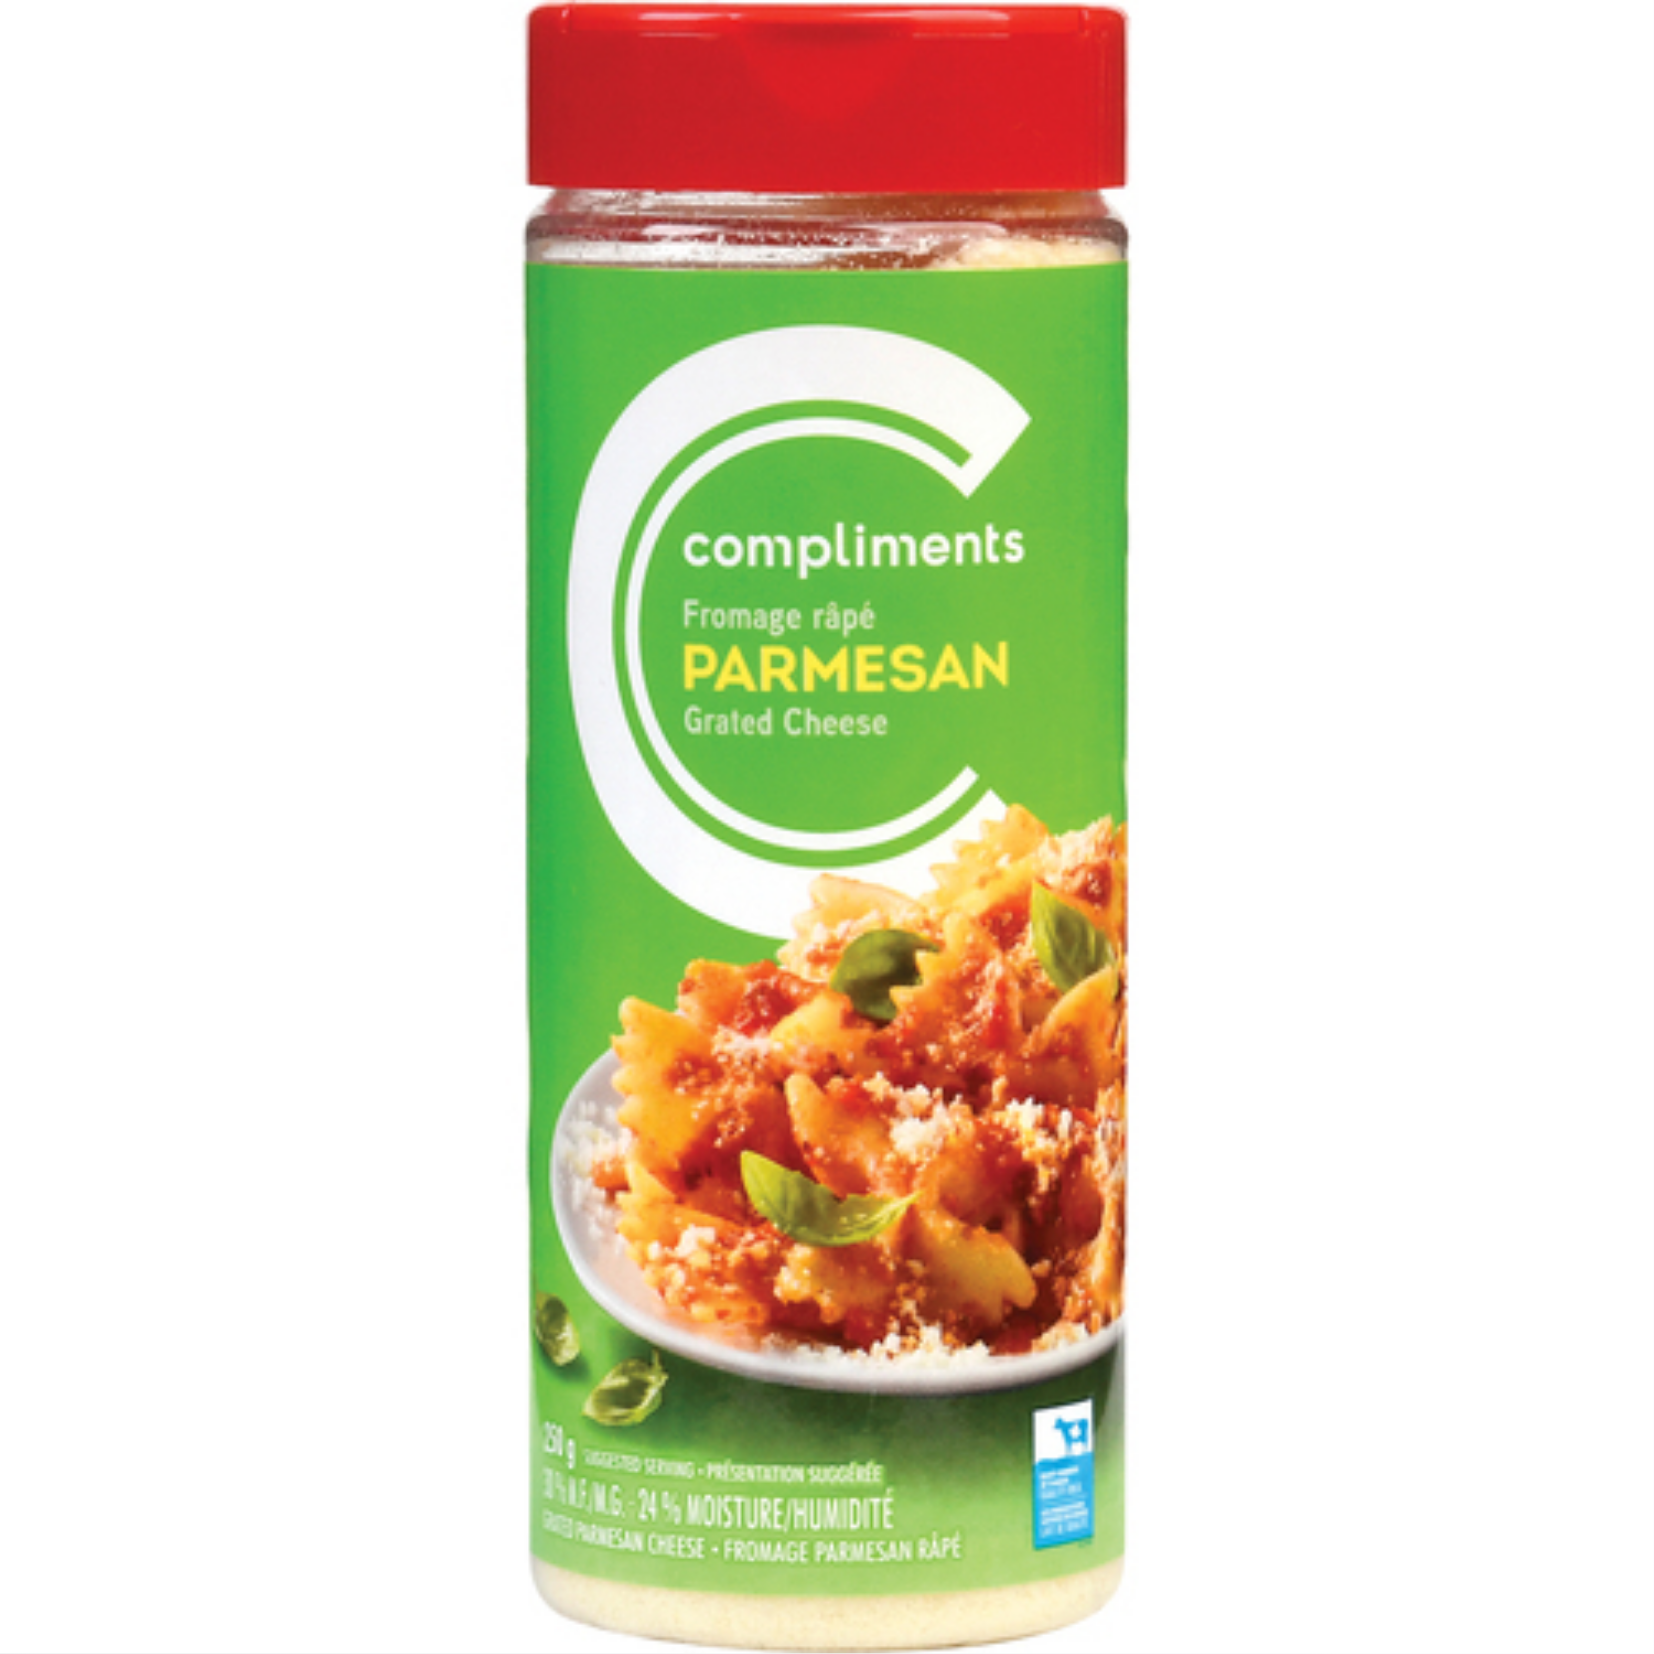 Compliments Grated Parmesan Cheese 250g